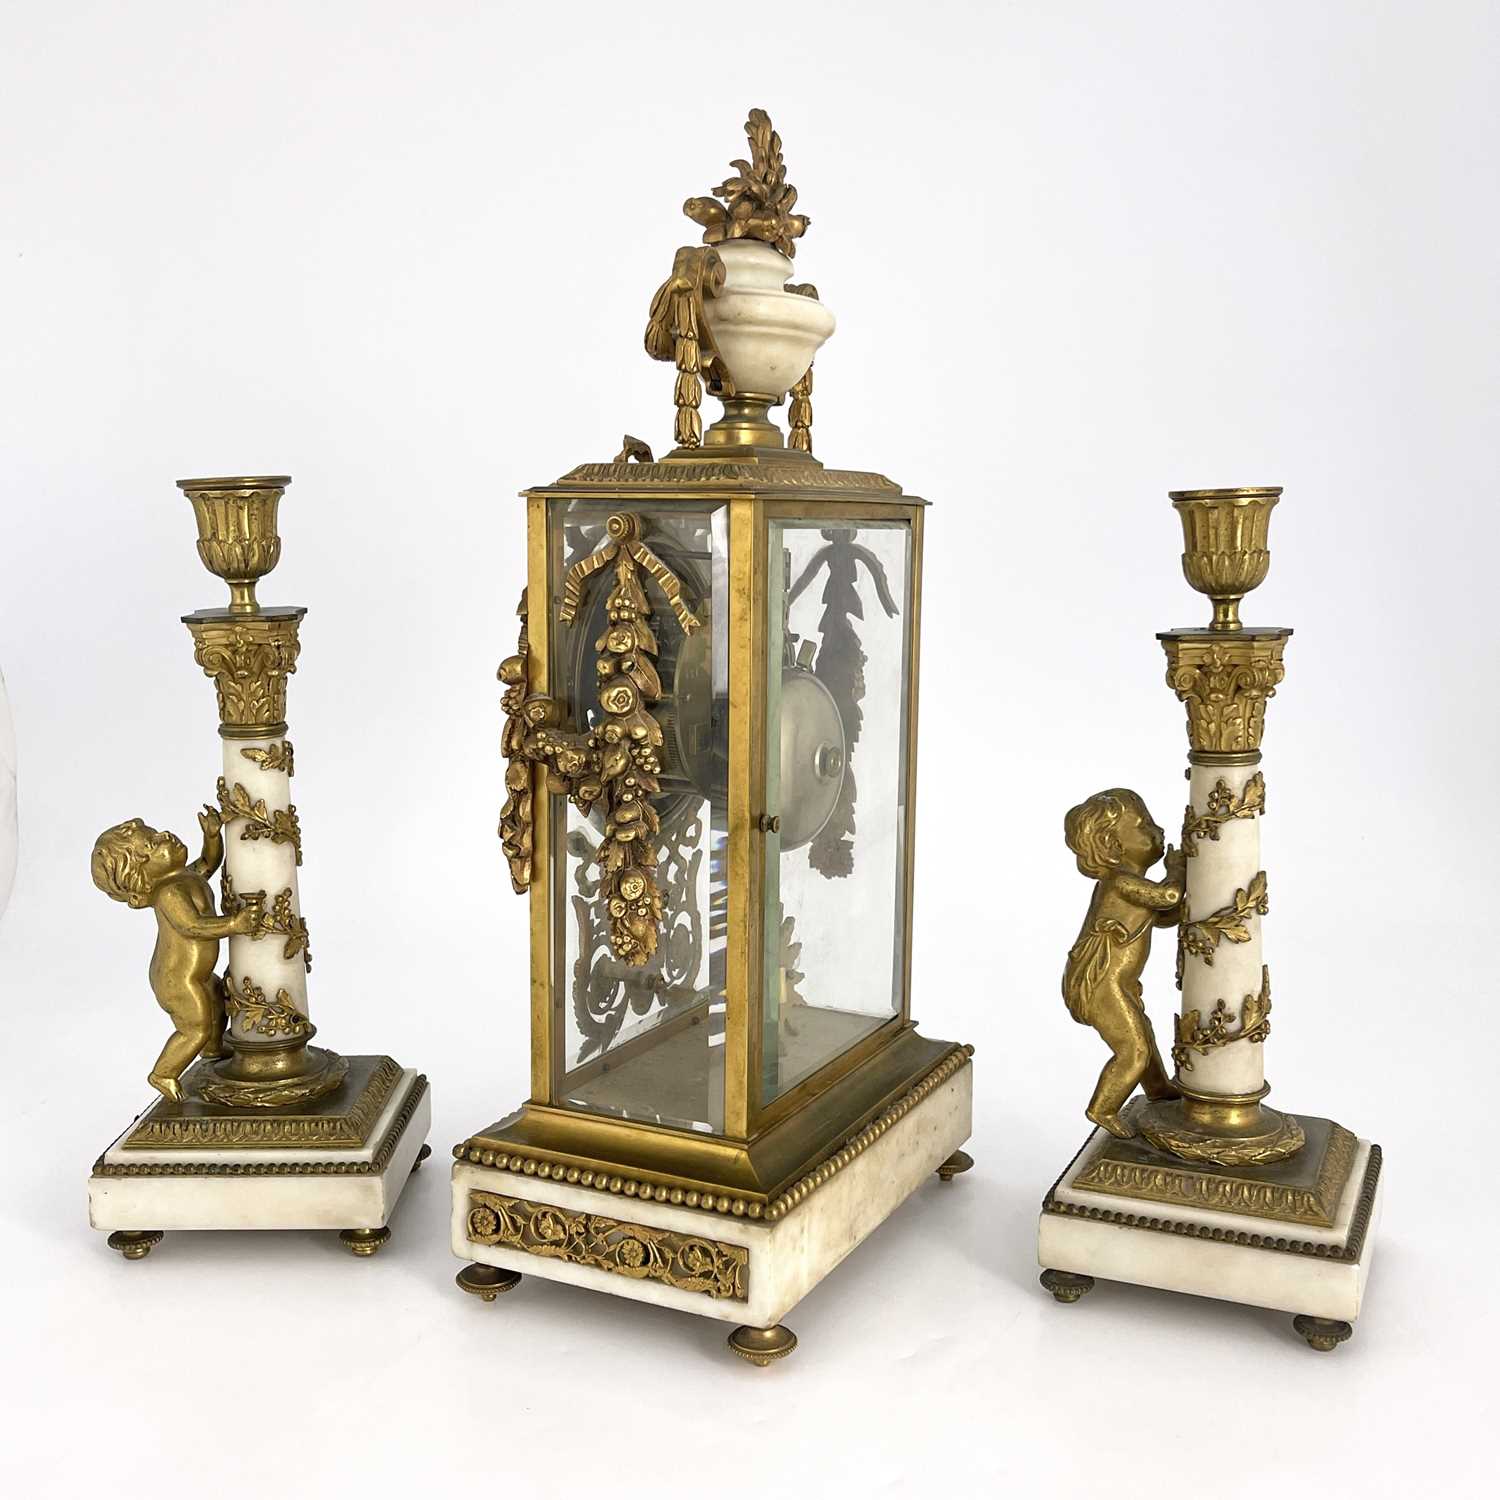 Leroy, Paris, a late 19th Century French clock garniture, gilt metal four-glass case with white - Image 3 of 5